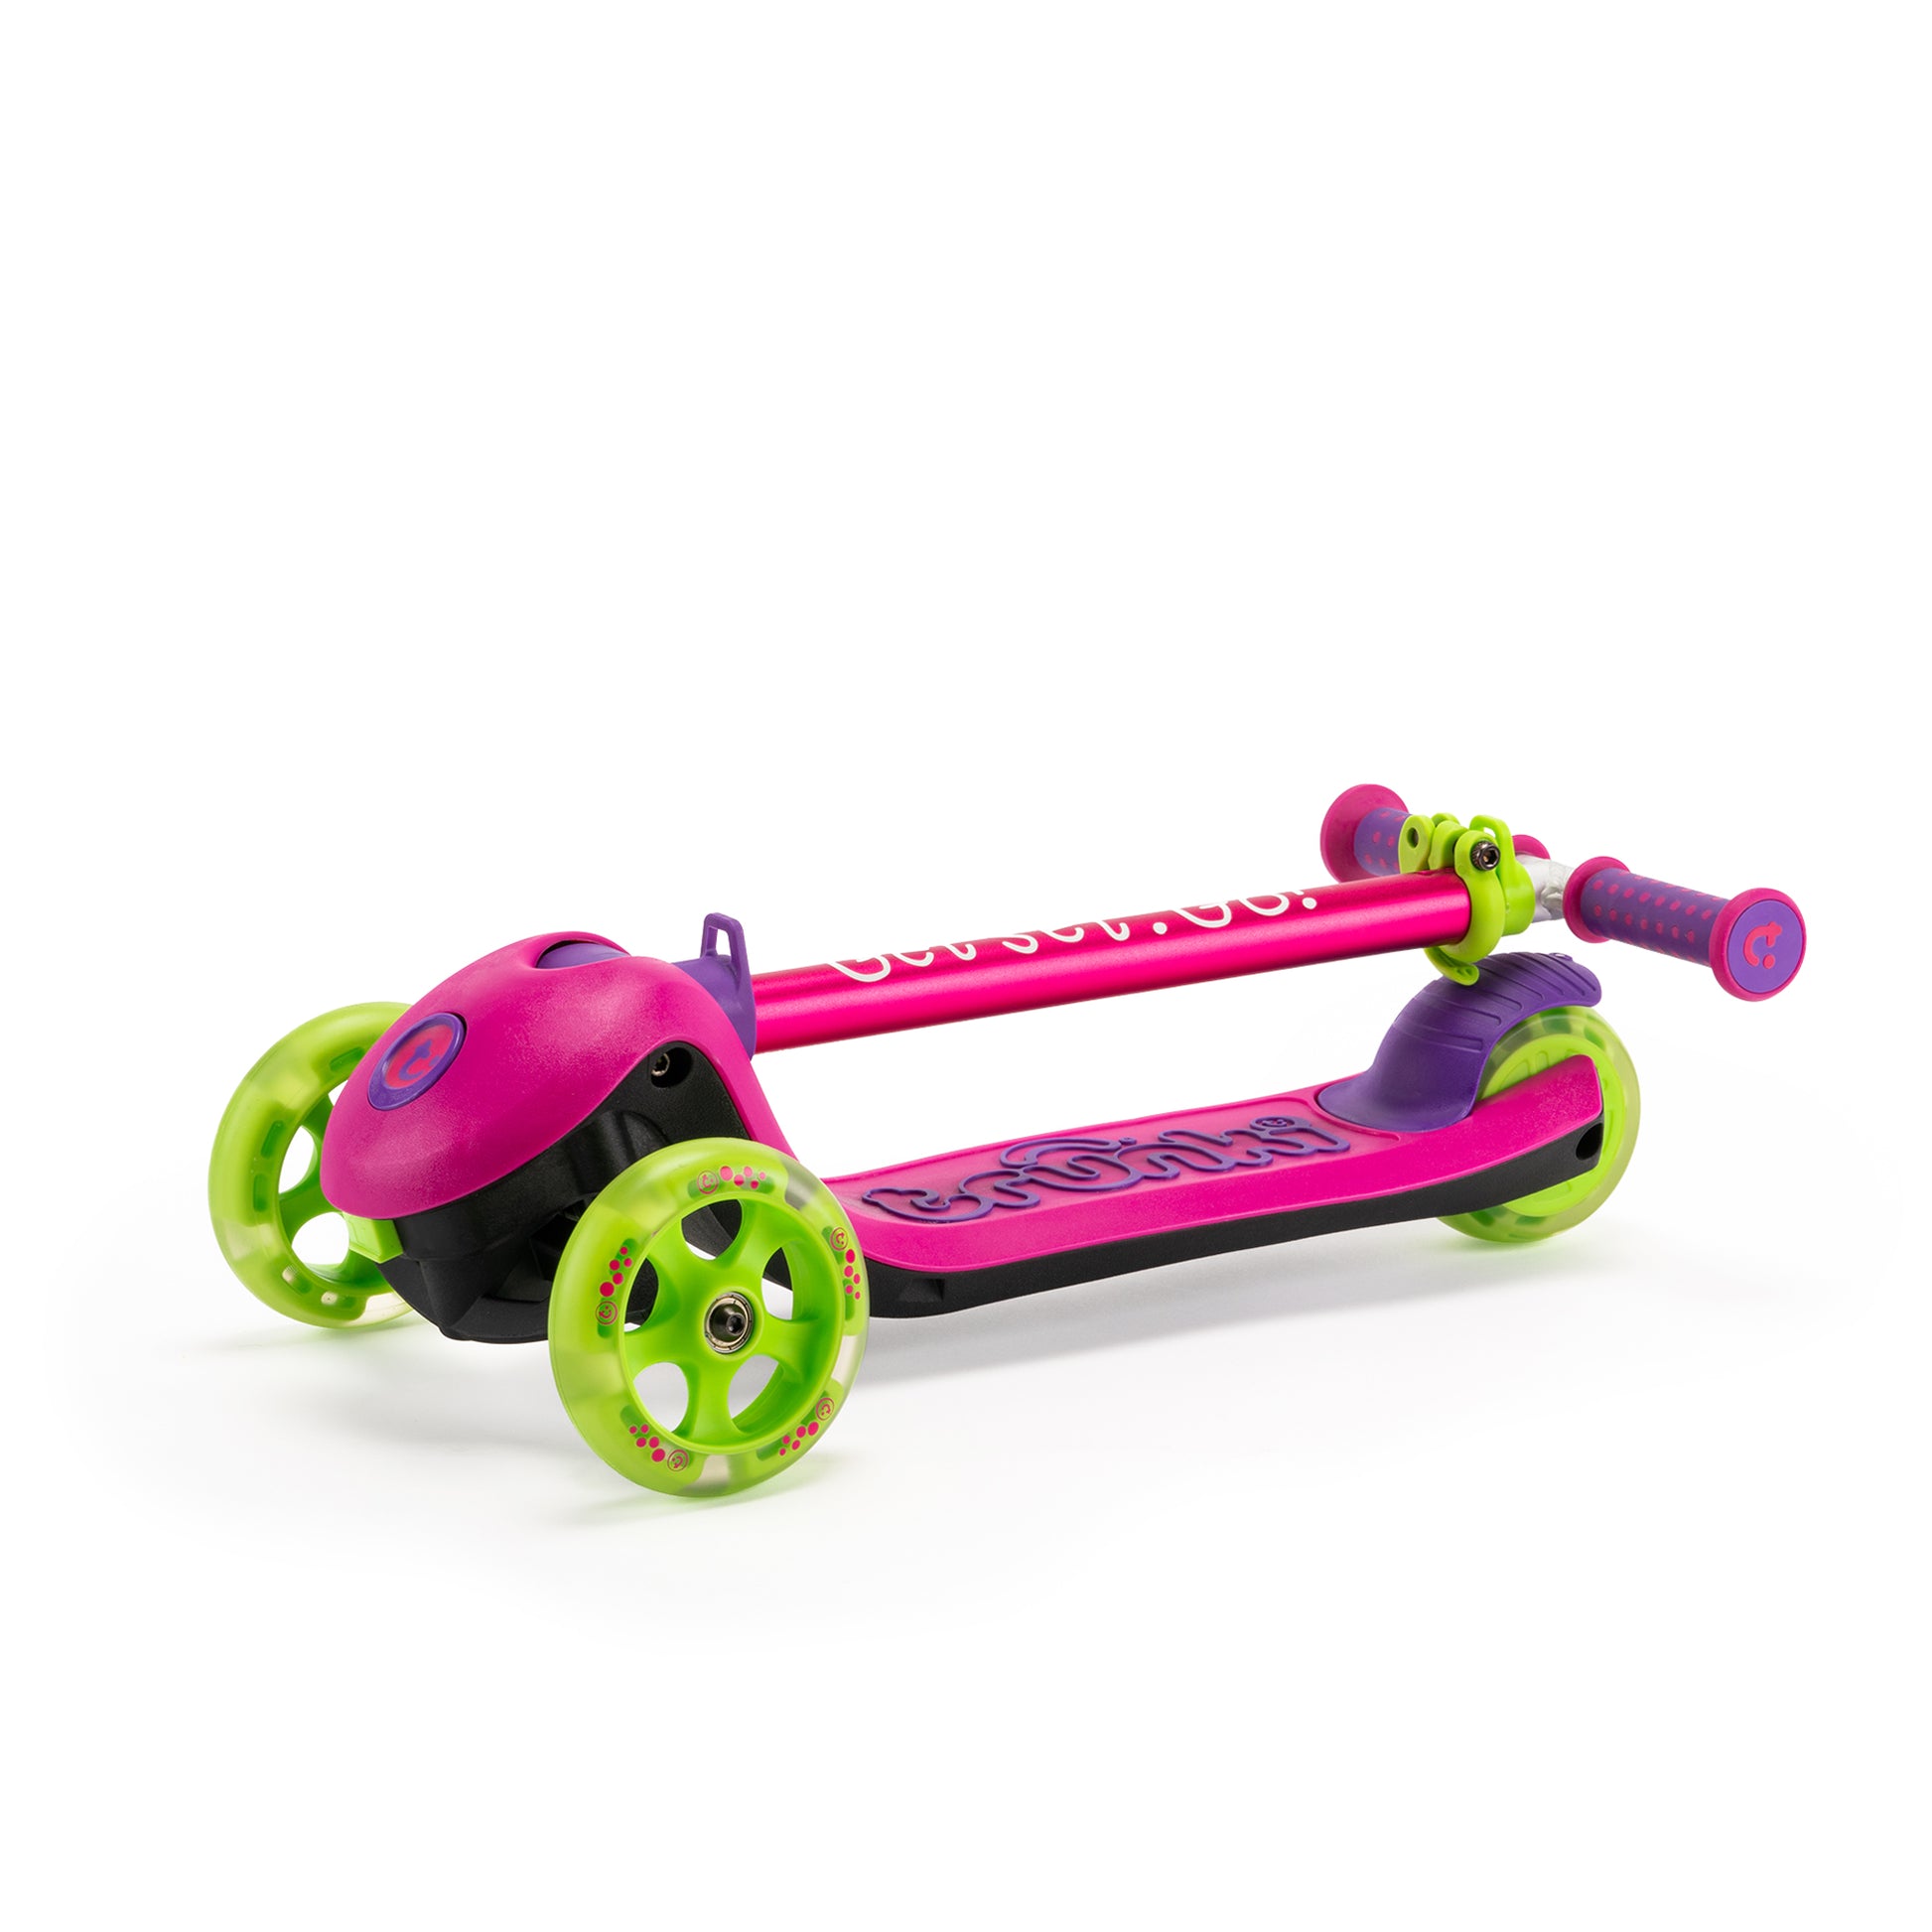 Trunki-Folding-Scooter-Small-Pink-Image2